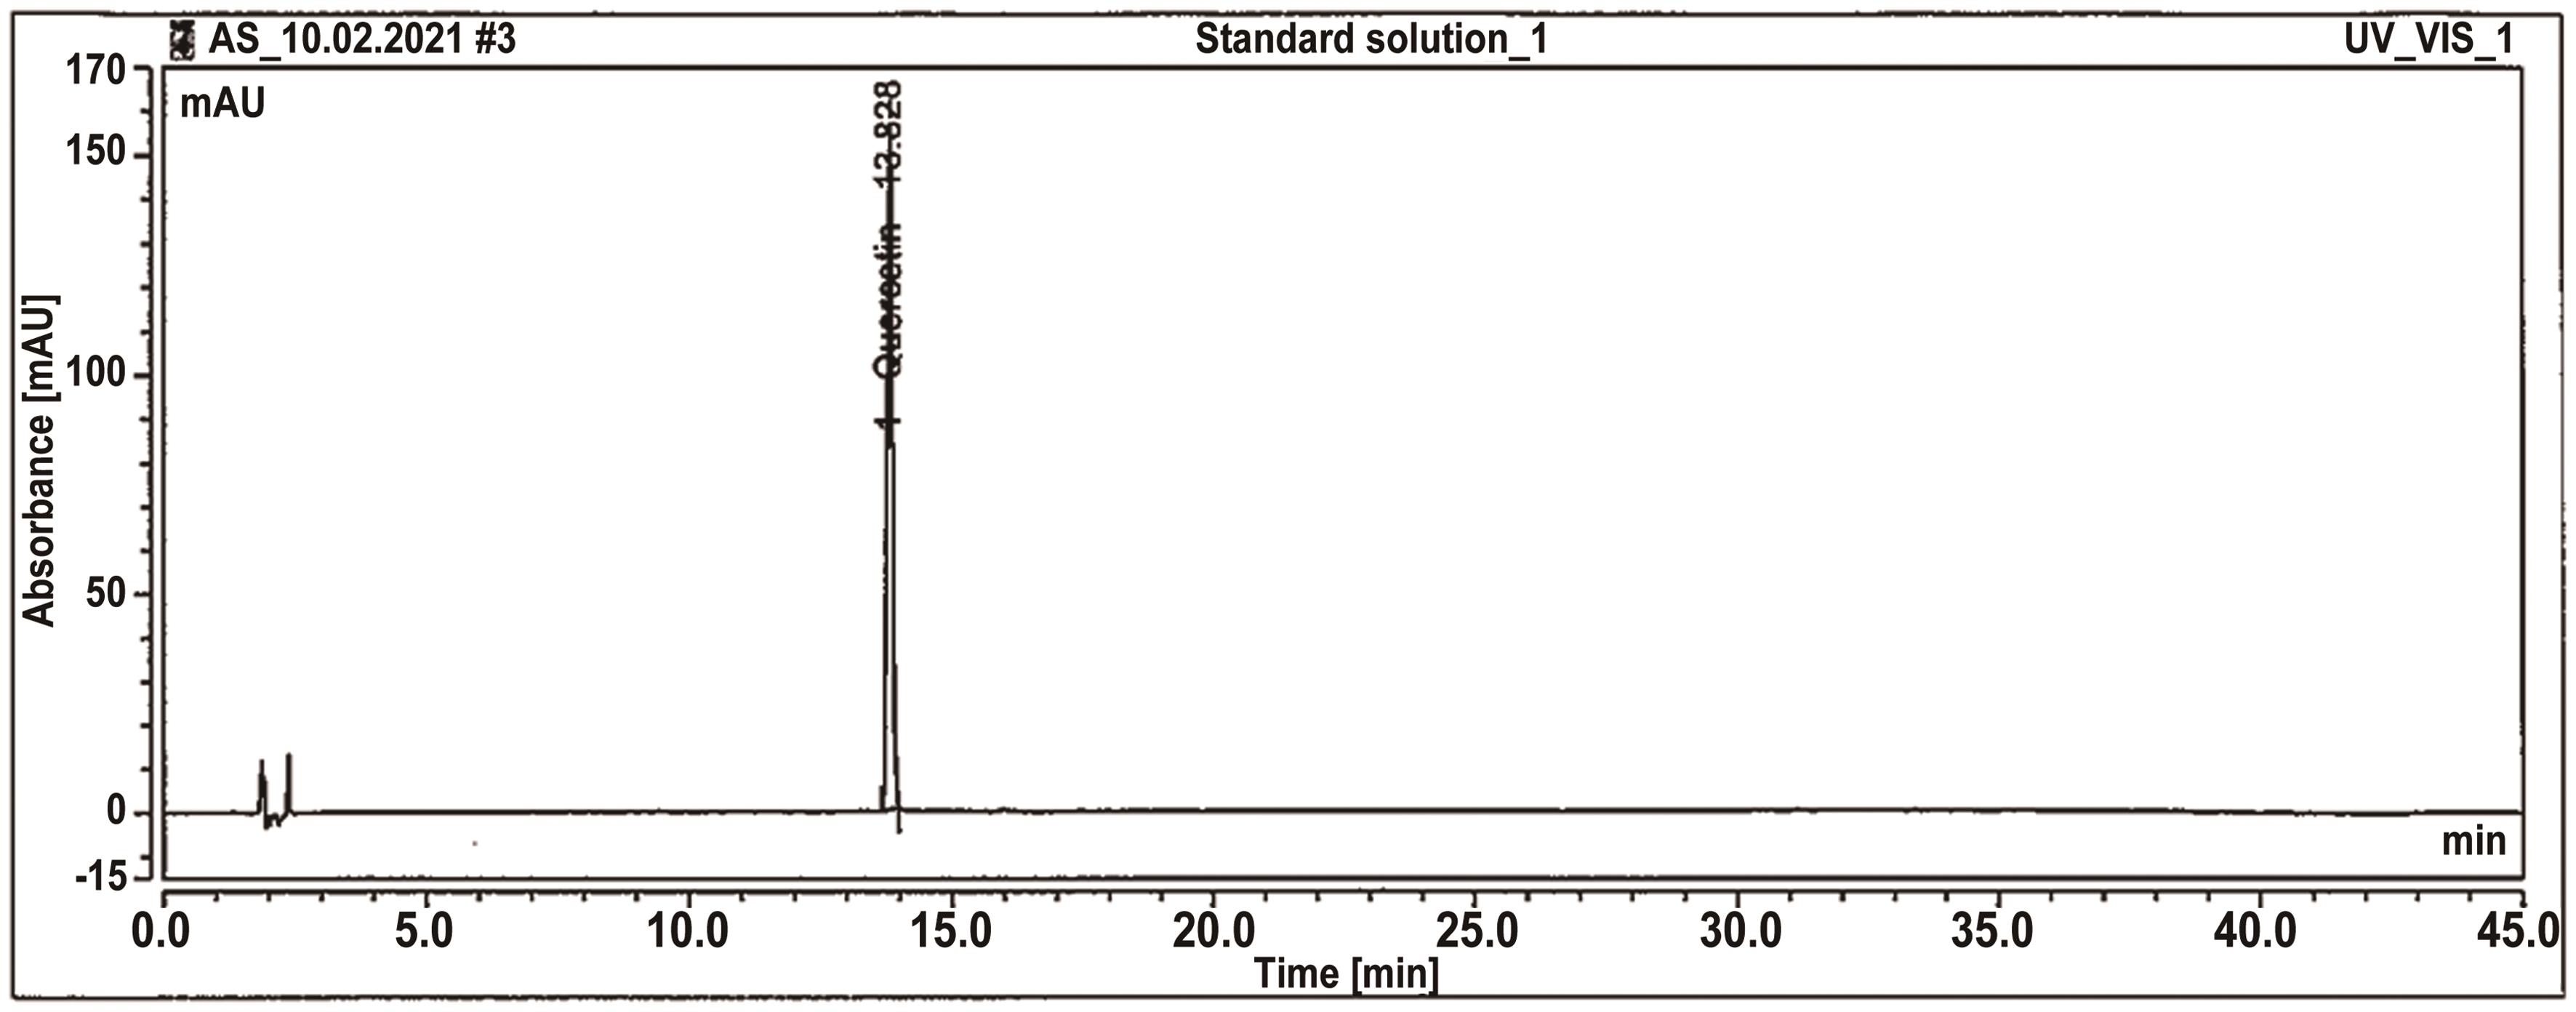 HPLC chromatogram of pure quercetin at 370 nm. Note the retention time (RT) of quercetin as 30.80 min.